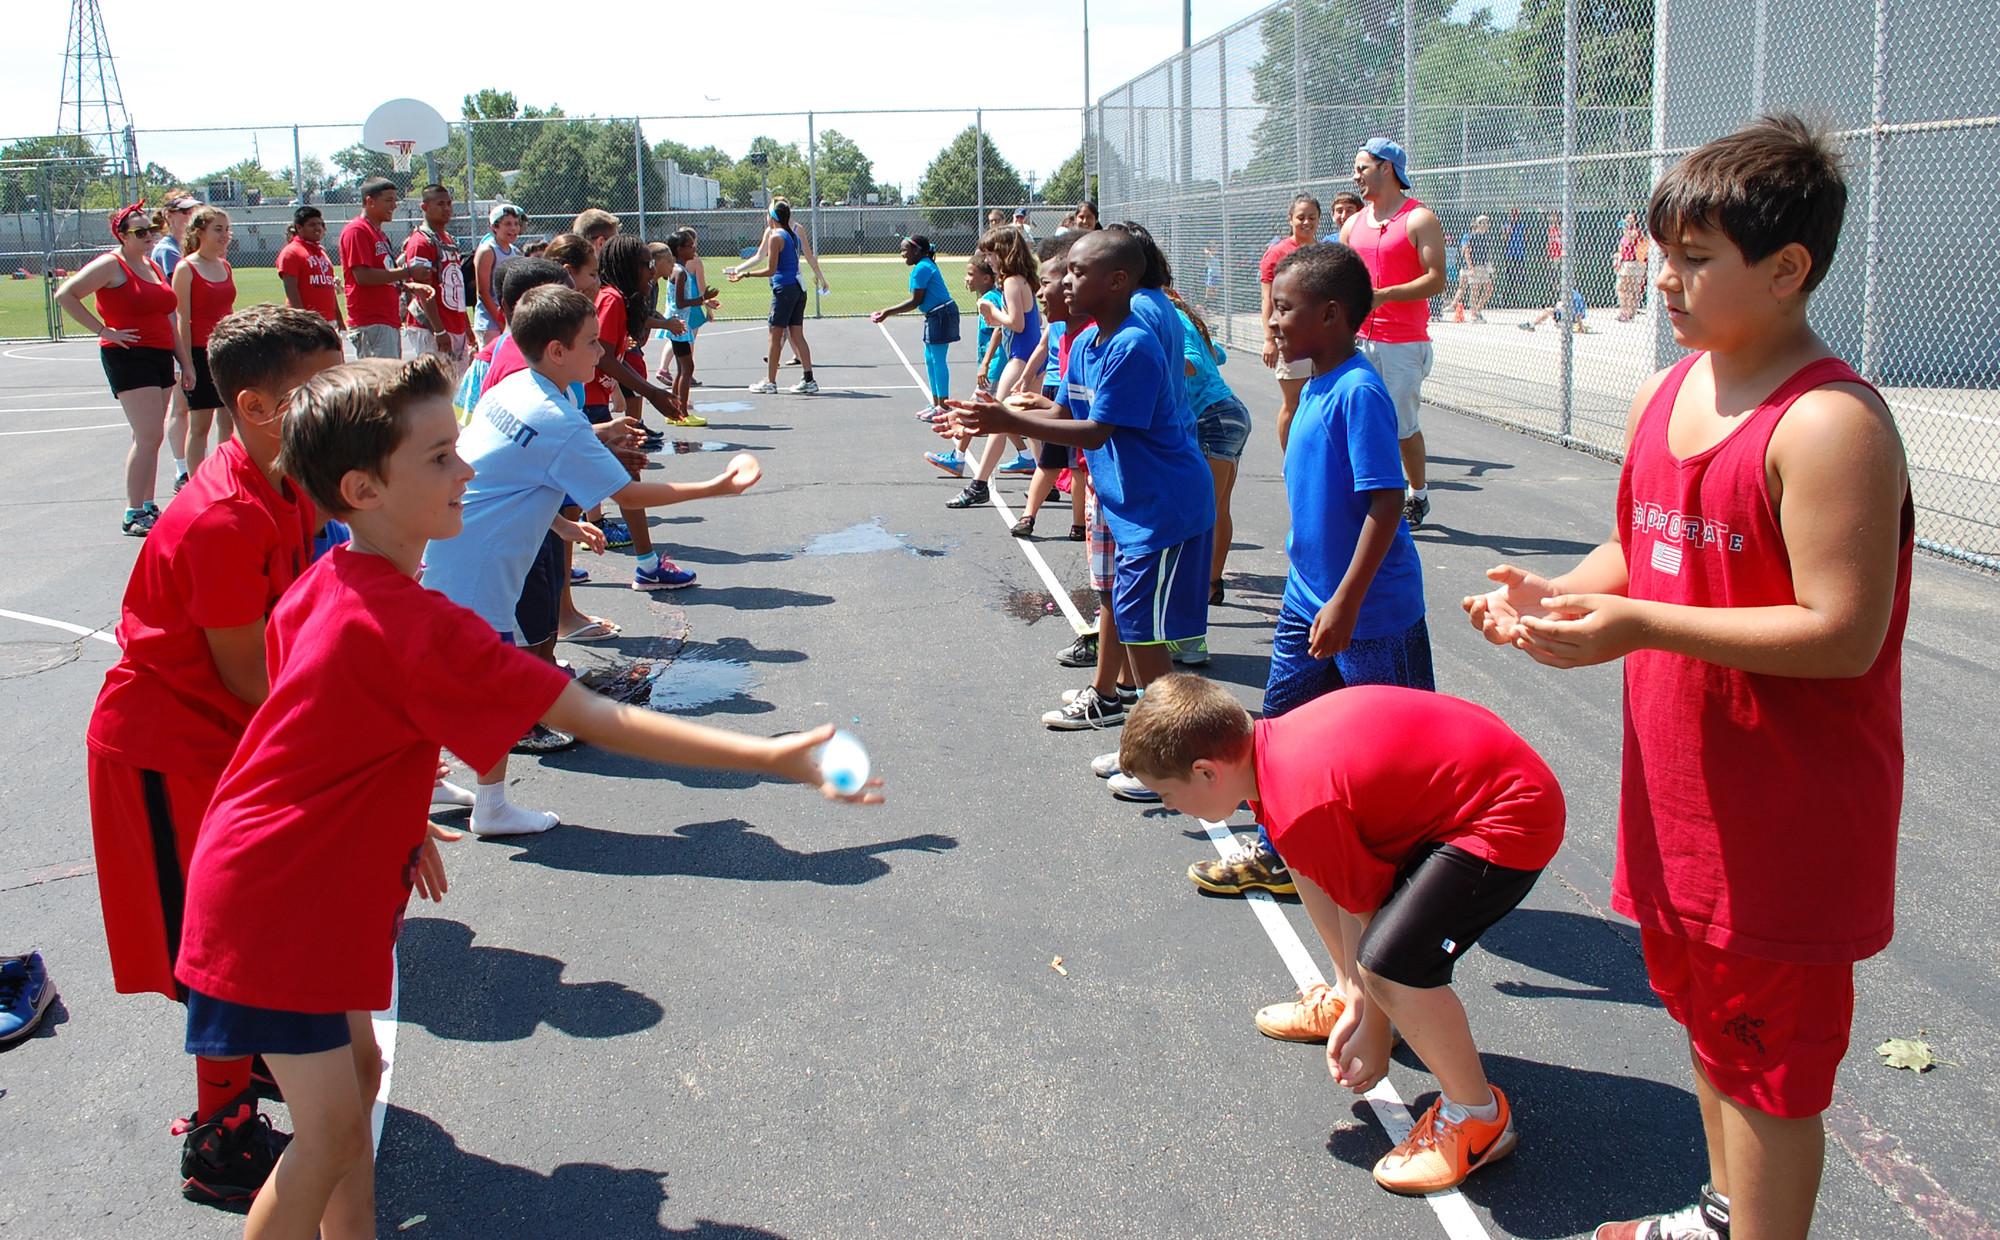 Campers participated in the water balloon toss at Camp Barrett's Color Wars competition on July 18.